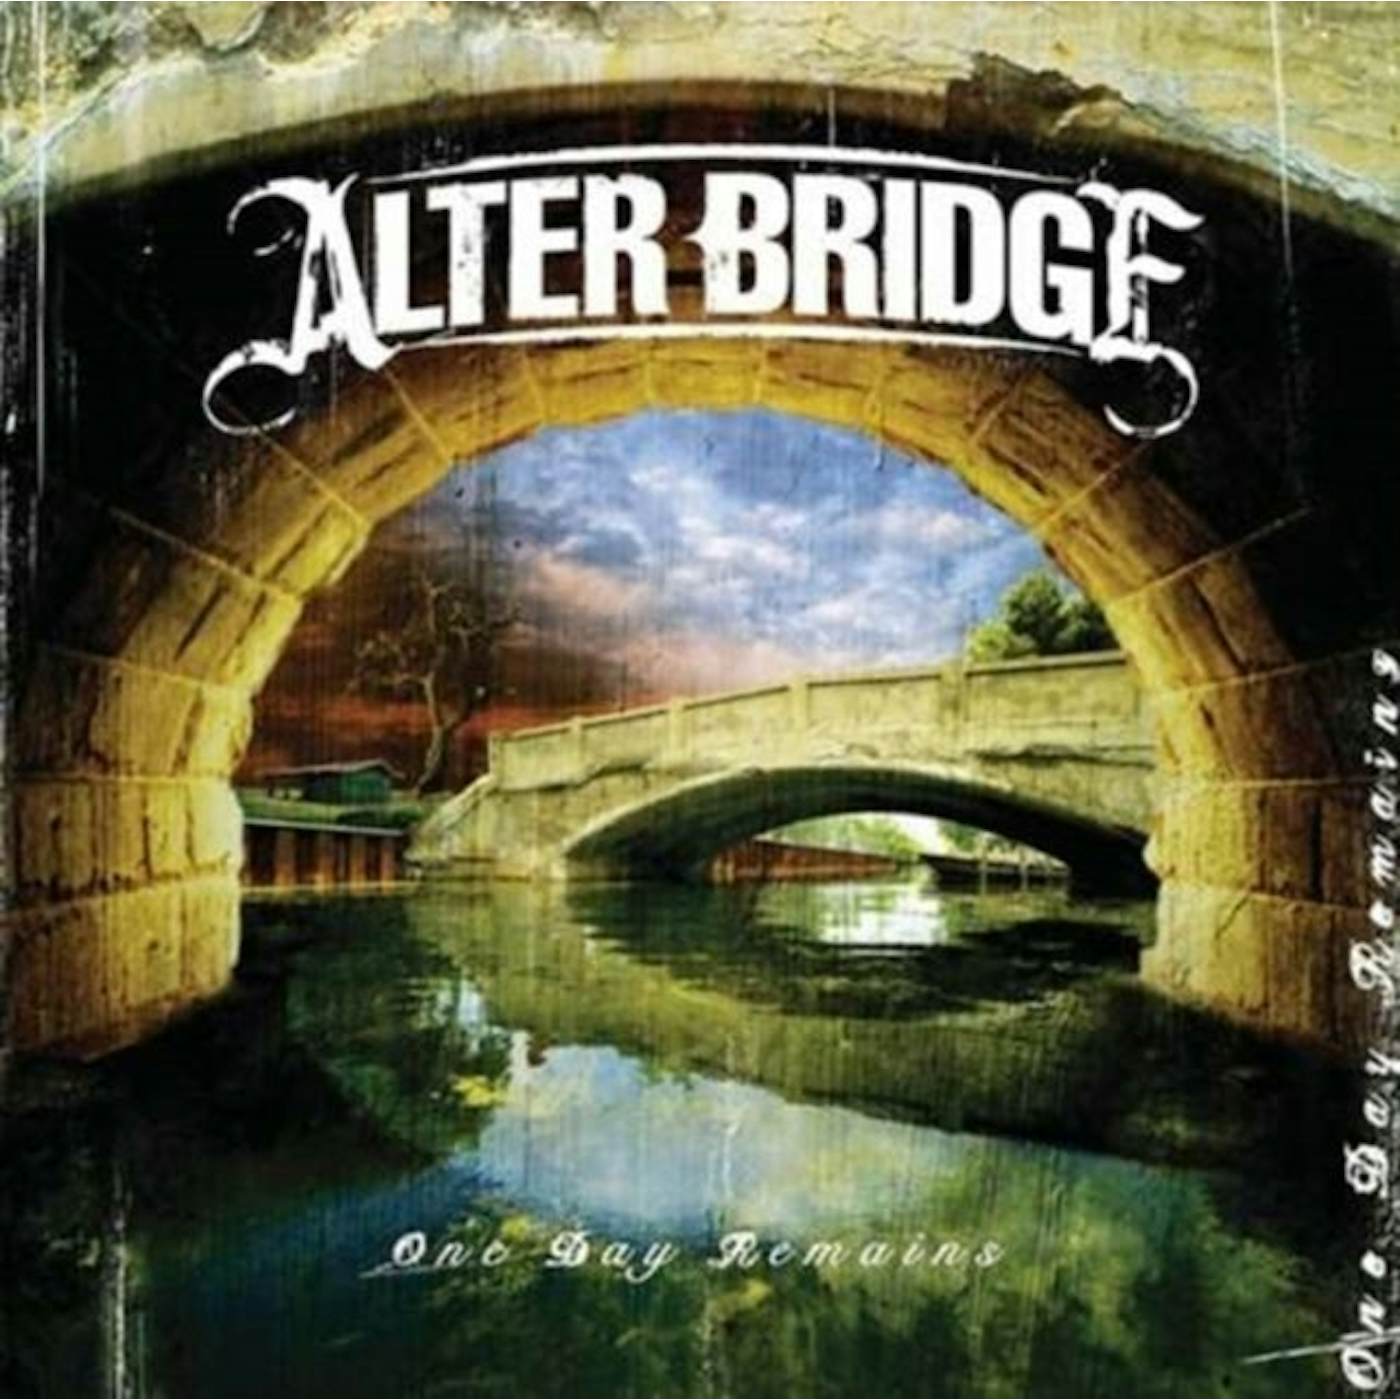 Alter Bridge CD - One Day Remains